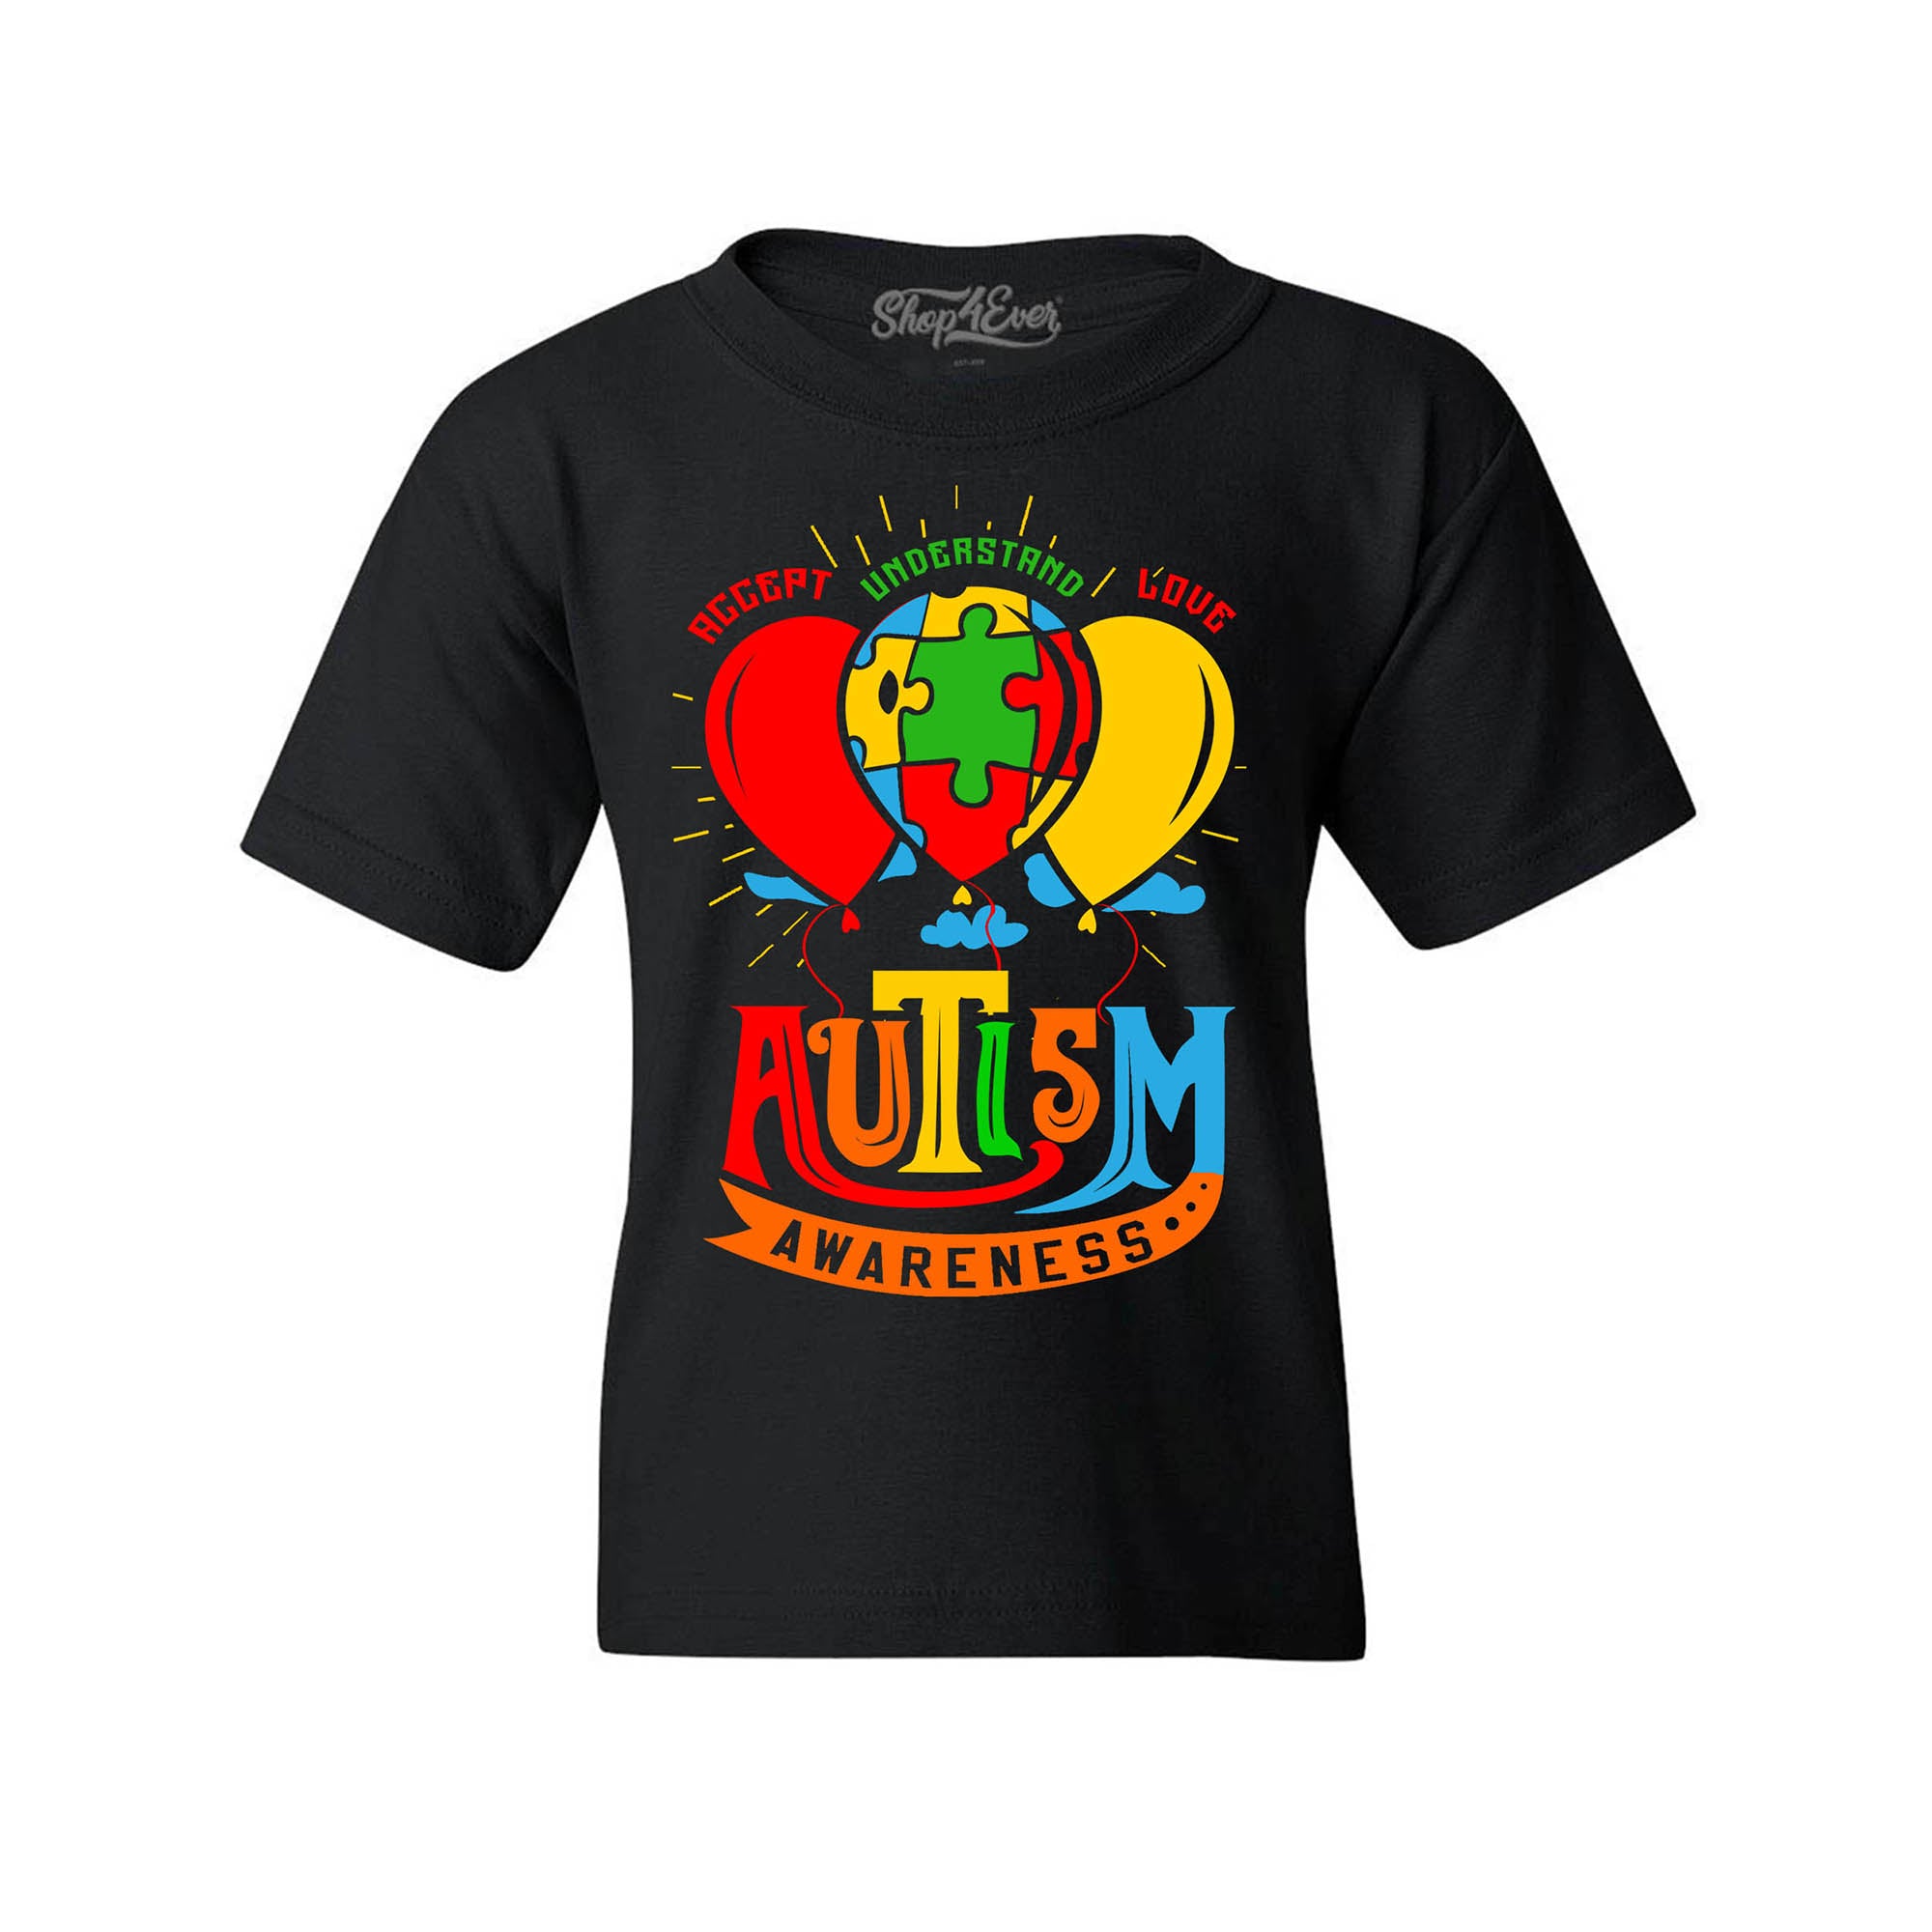 Autism Awareness with Balloons Child's T-Shirt Kids Tee